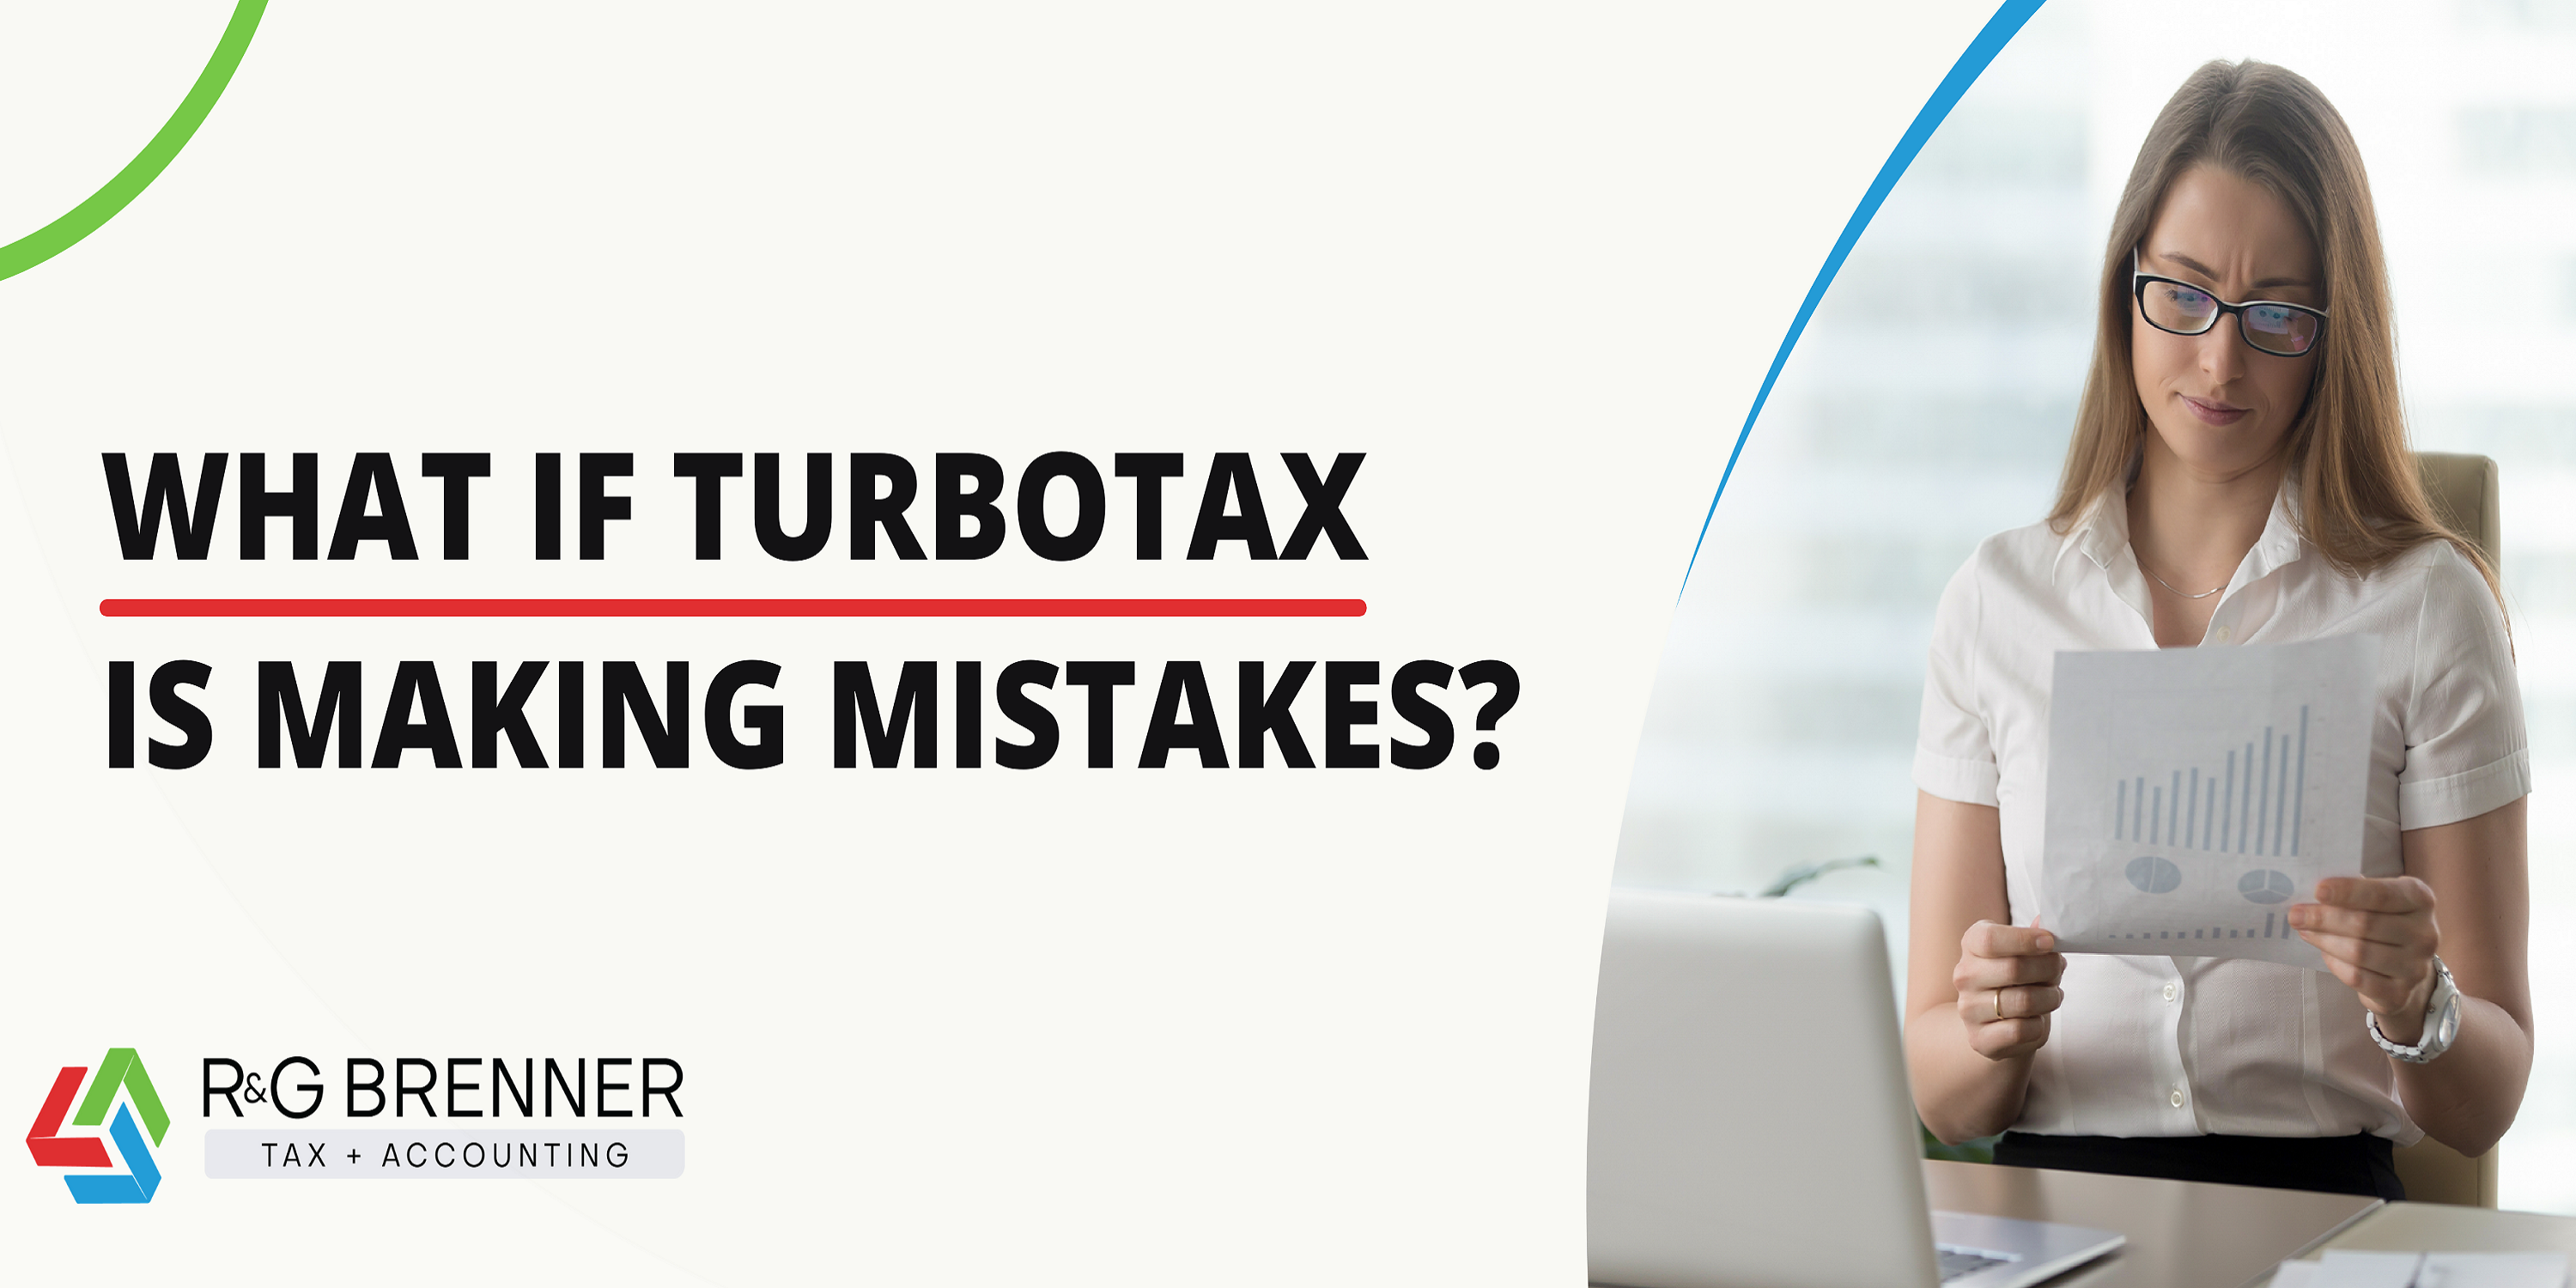 turbotax home and business 2010 download free full version